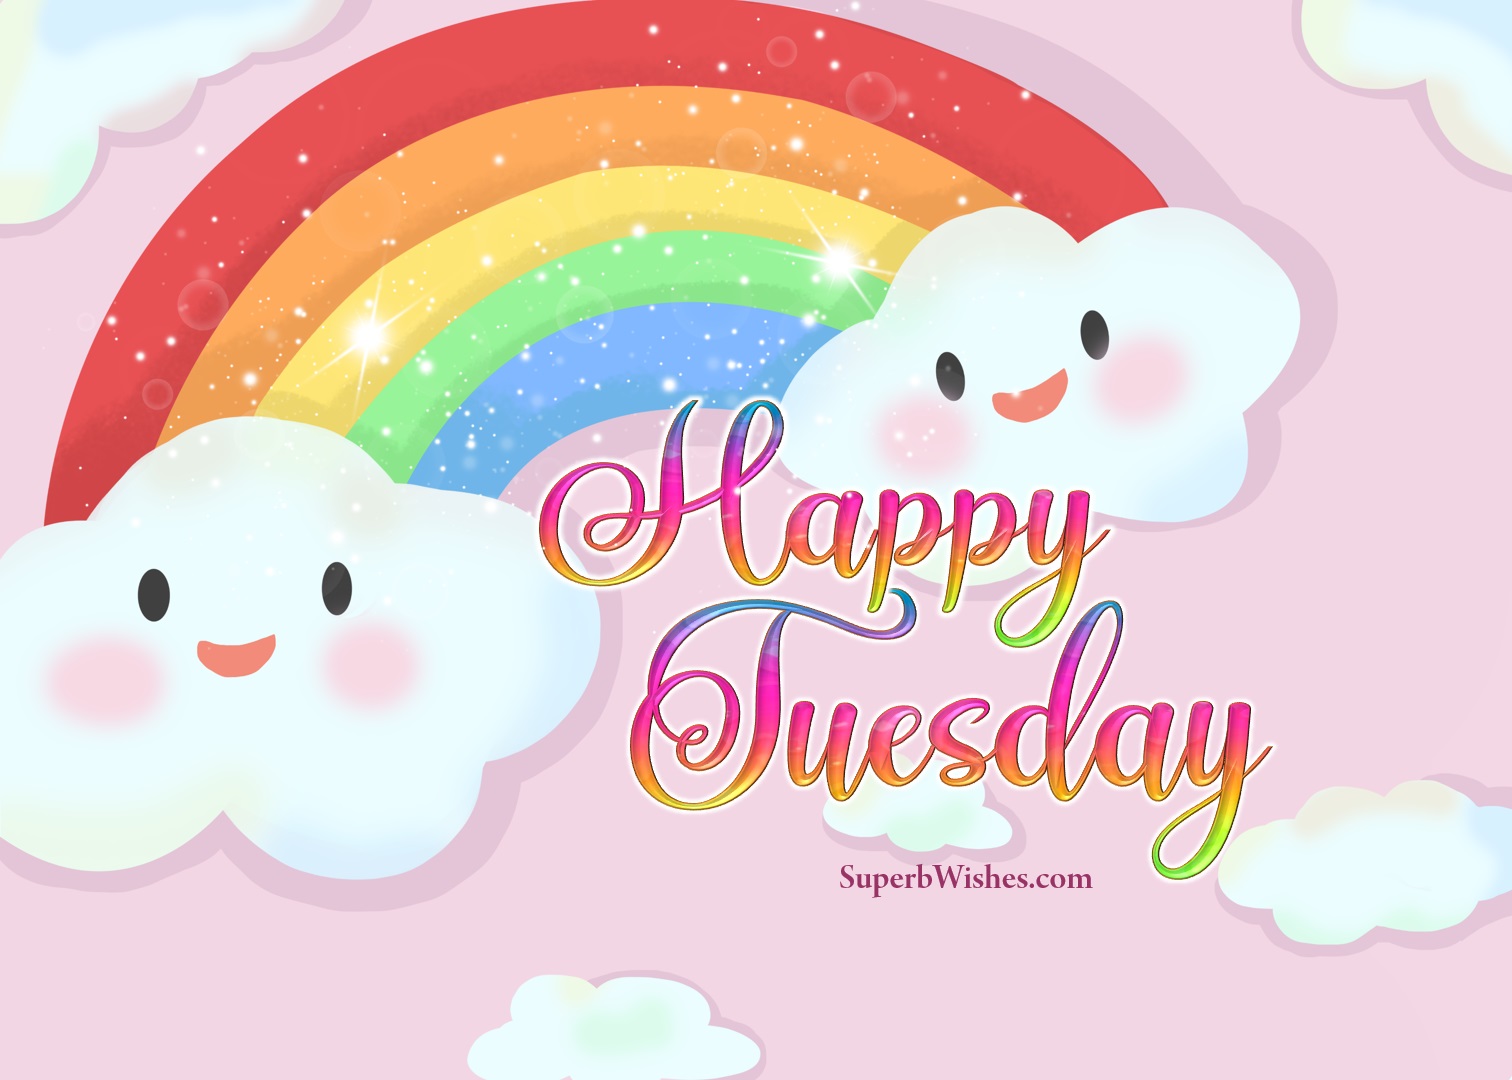 Cute happy Tuesday images. Superbwishes.com